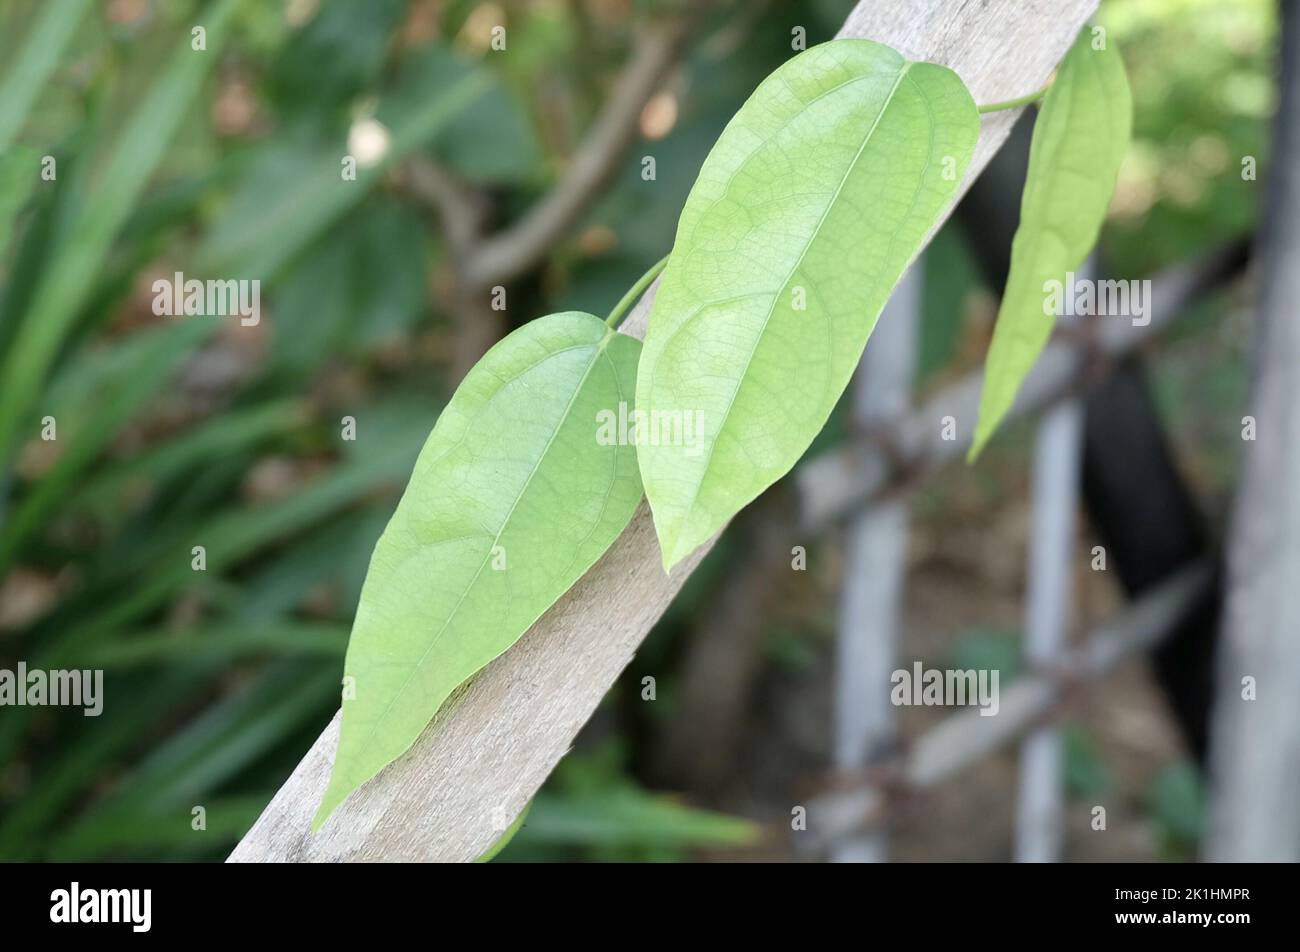 Vegetable and Herb, Fresh Tiliacora Triandra or Bai Ya Nang Leaves Climbing on Bamboo Pole. Used as Healthy Foods and Herbal Medicines. Stock Photo